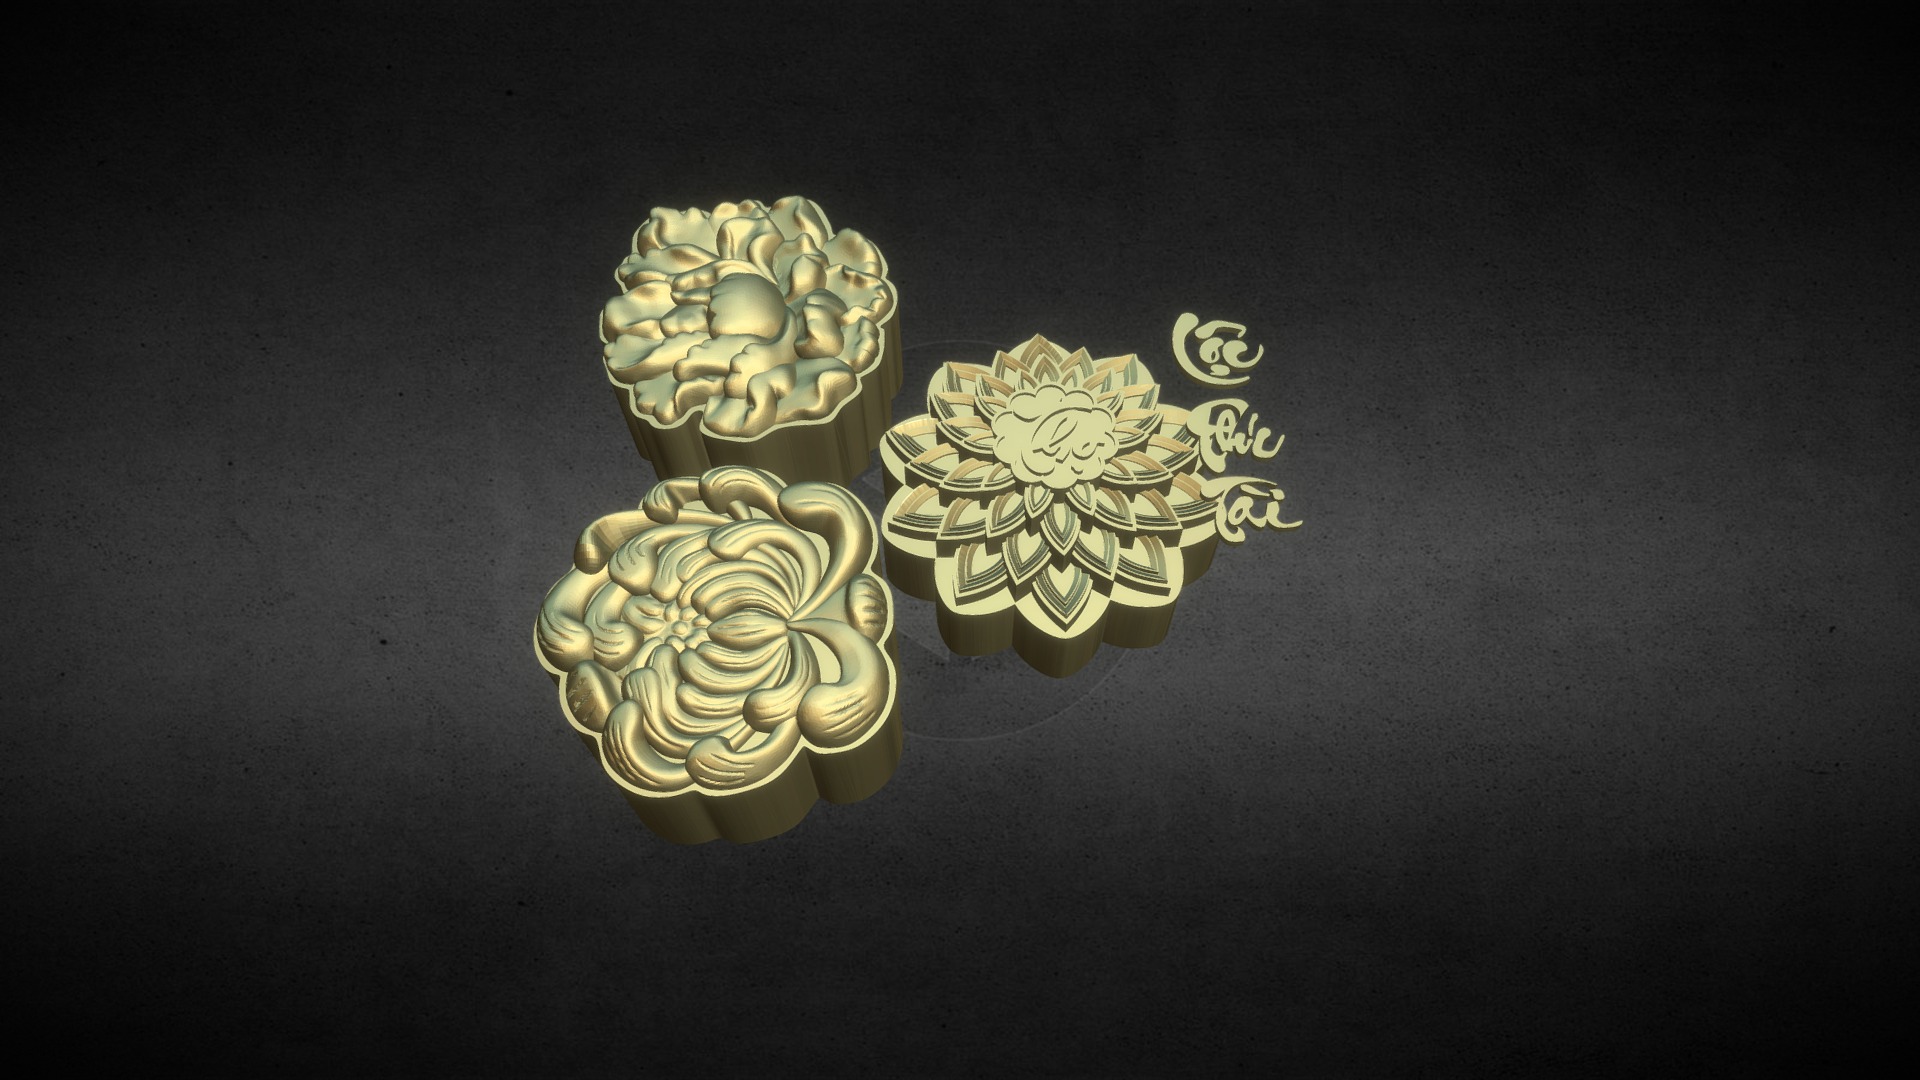 3D model MOON CAKE MOULD – Kinds of Vietnamese Mooncakes - This is a 3D model of the MOON CAKE MOULD - Kinds of Vietnamese Mooncakes. The 3D model is about a pair of gold and green earrings.